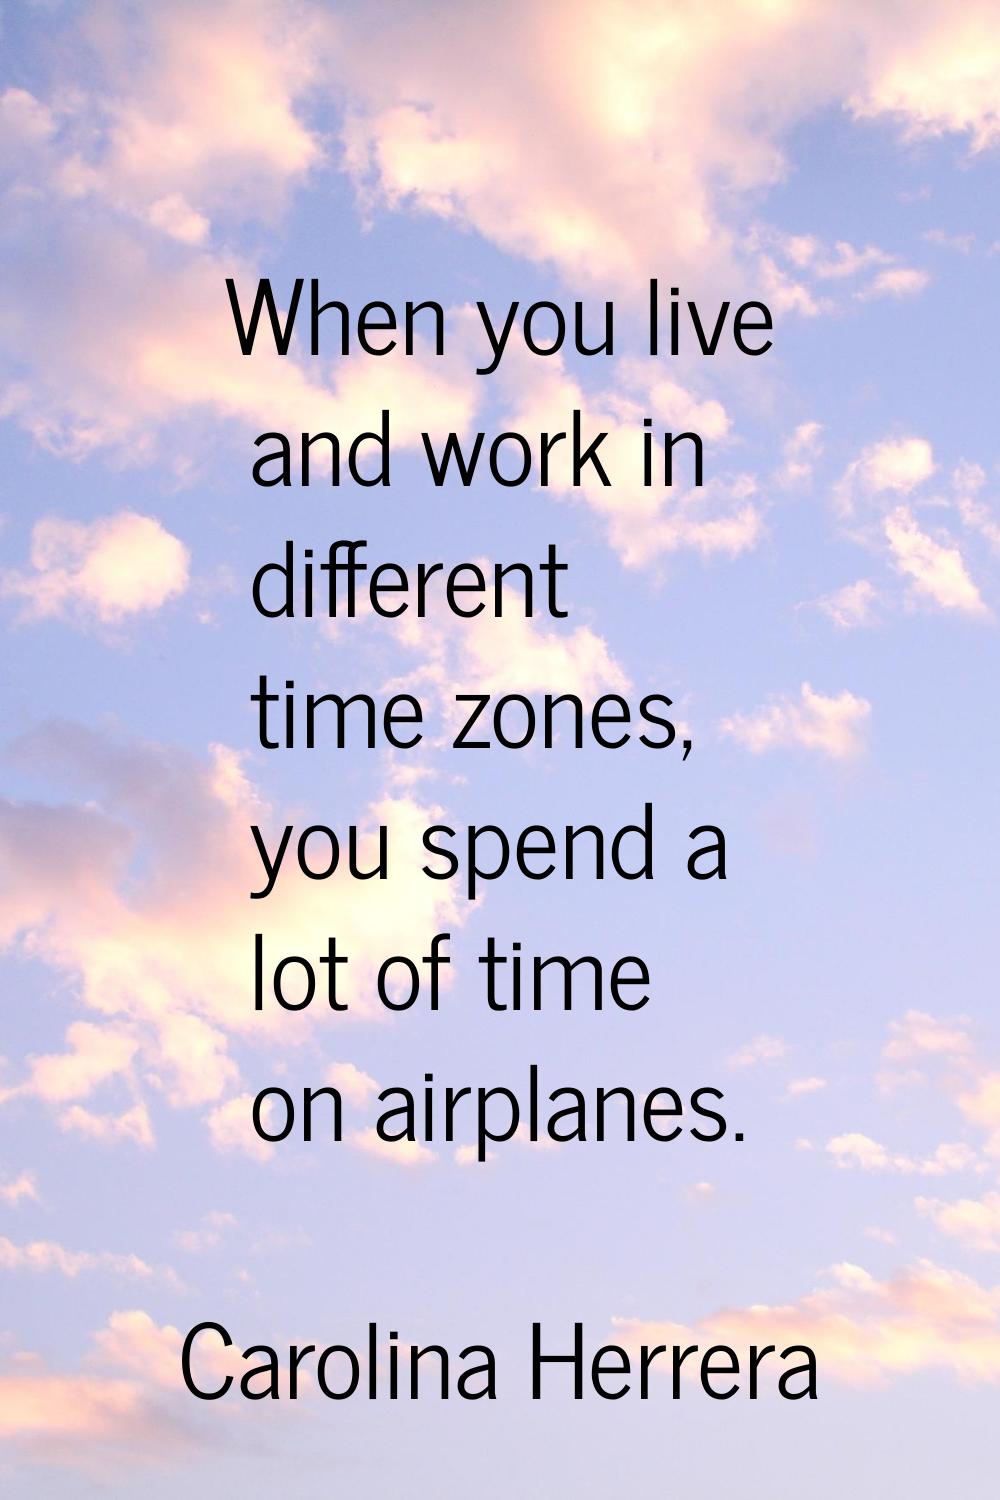 When you live and work in different time zones, you spend a lot of time on airplanes.